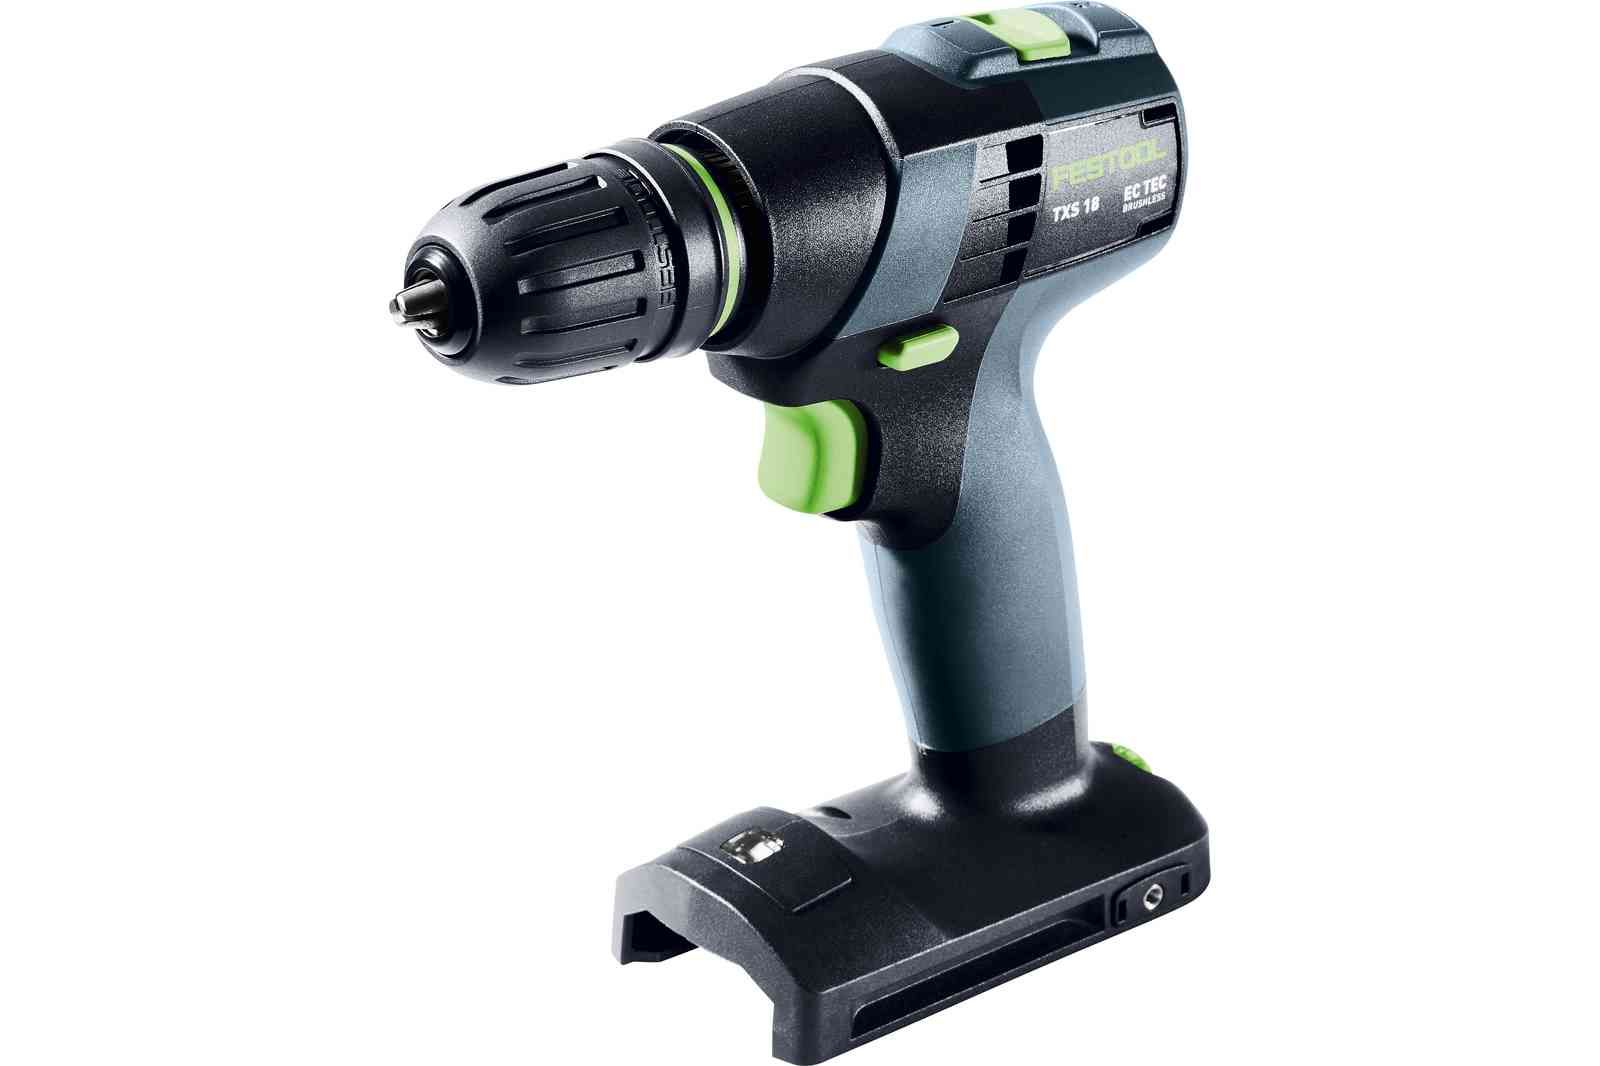 TXS 18V Cordless Compact 2 Speed Drill Basic in Systainer Bare (Tool Only) 576894 by Festool